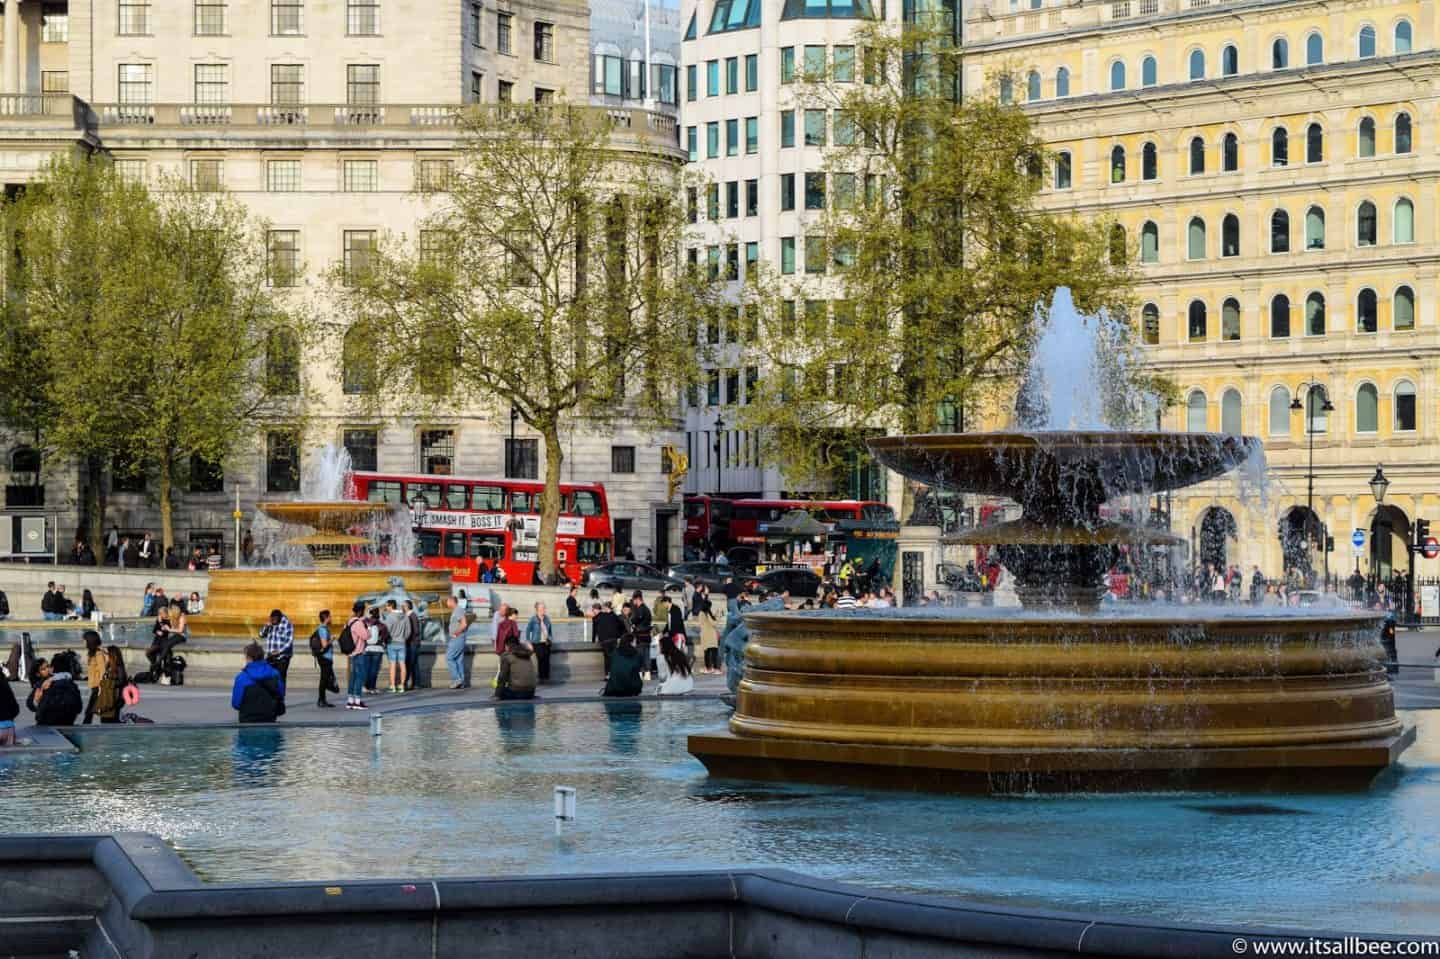 best free things to do in london | free stuff to do in london | what to do in london today free | things to do in central london for free